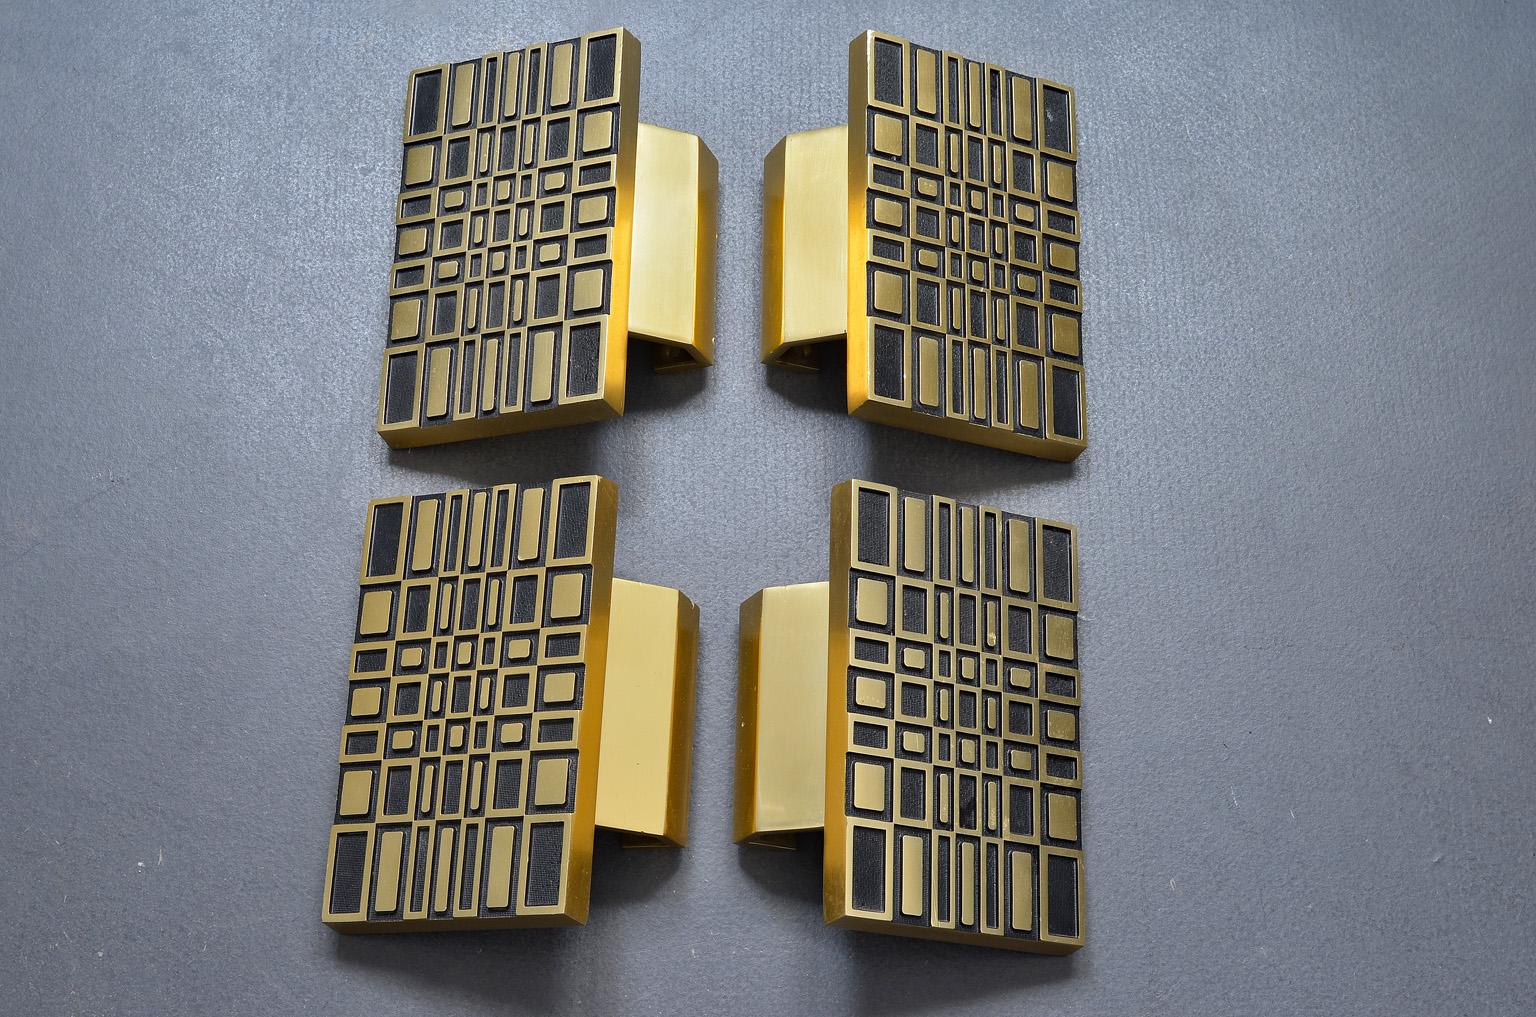 Late 20th Century Pair of Midcentury Brass Door Handles Geometric Gold and Black Design, 1970s For Sale